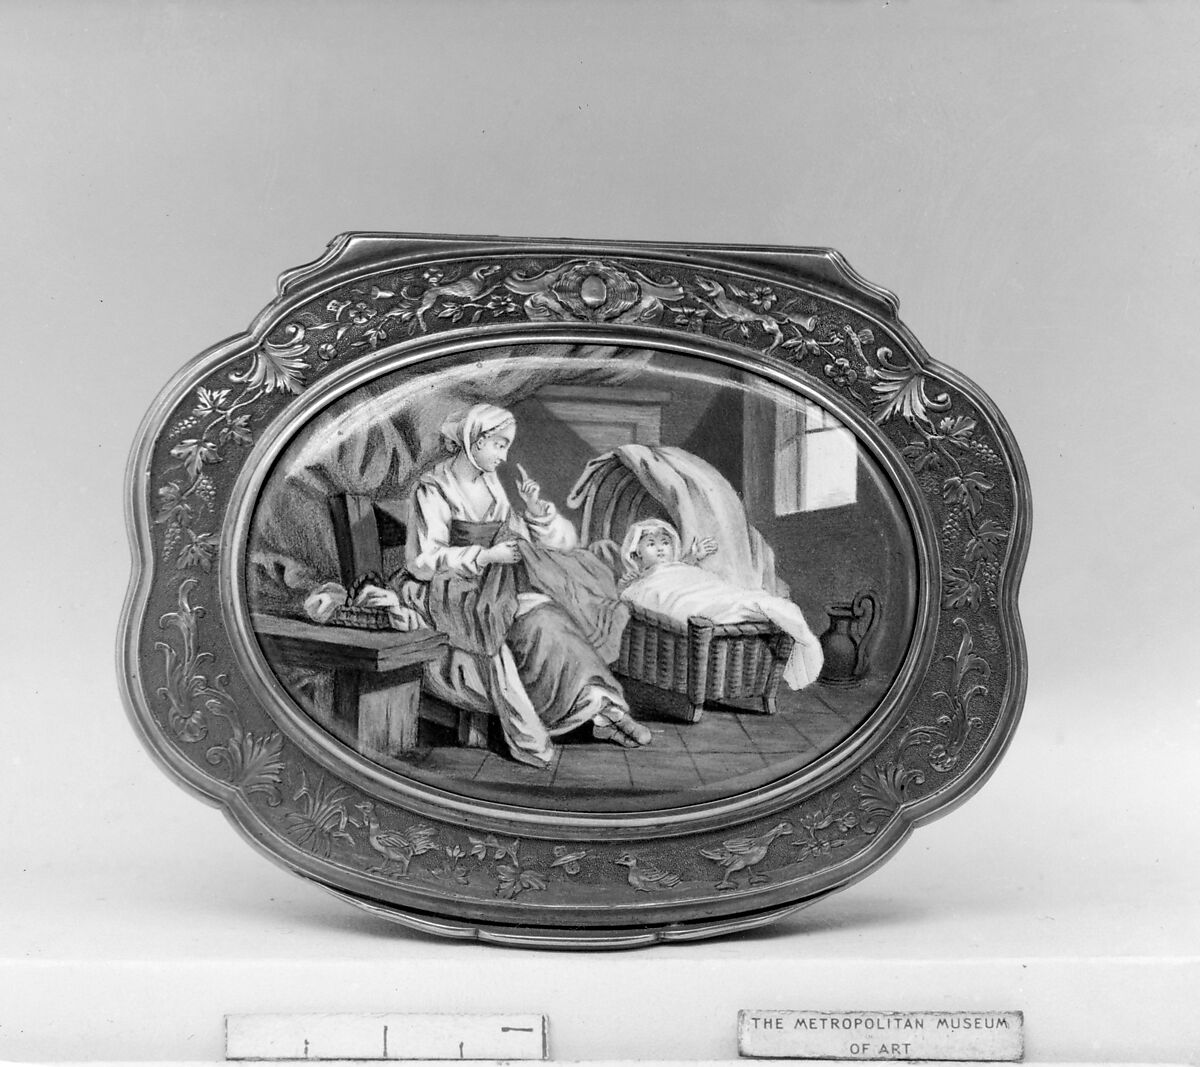 Snuffbox with domestic scene, Gold, enamel, possibly German 